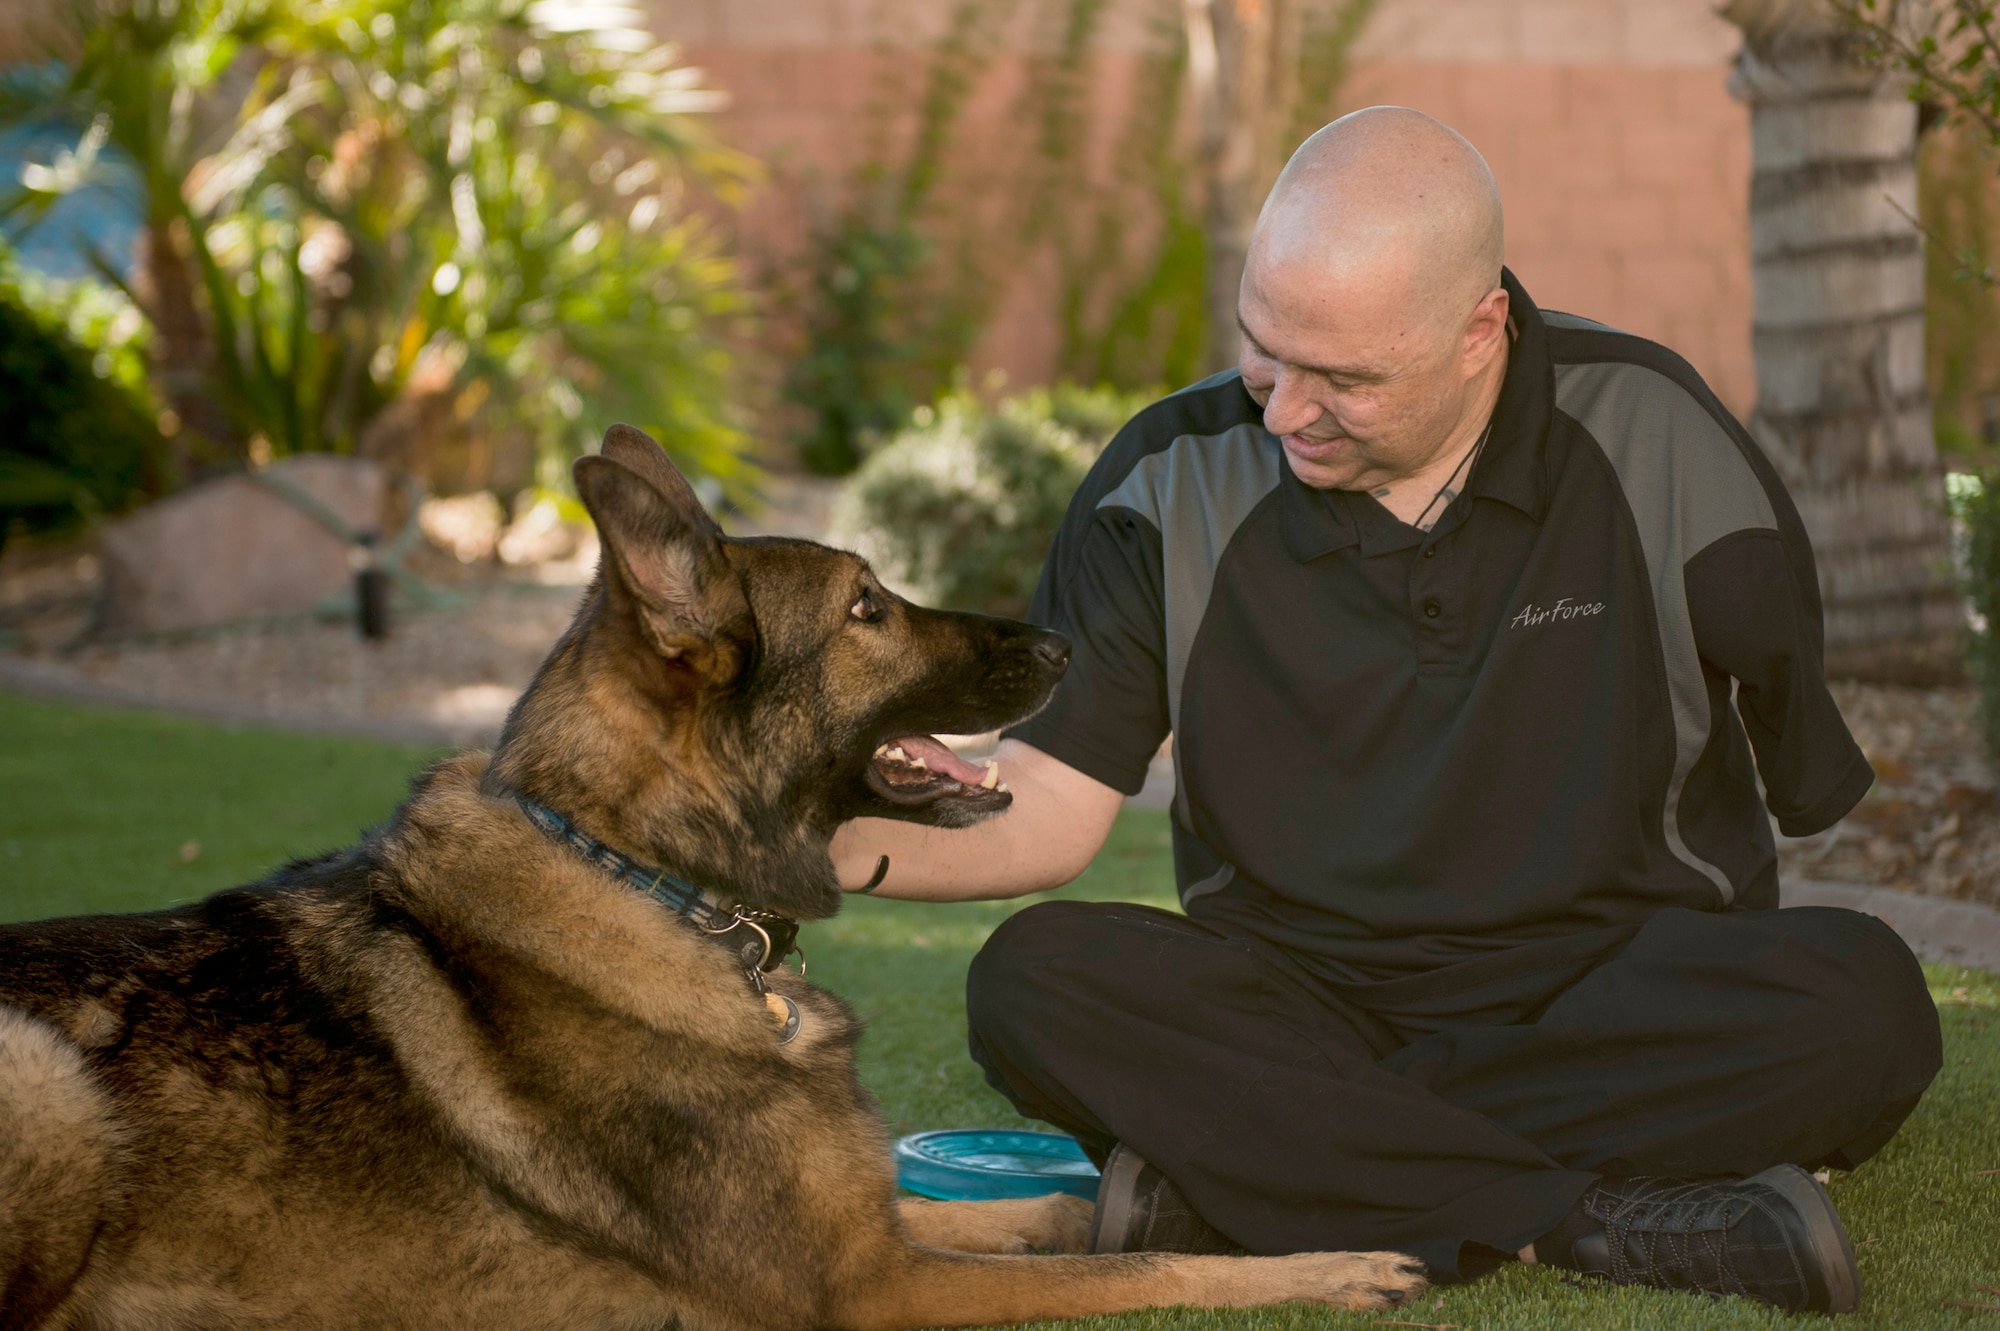 Retired Tech. Sgt. Matthew Slayton plays with Legend, his guide dog, Oct. 24 at his home near Luke Air Force Base. Slaydon received Legend in October 2010 from Fidelco Guide Dogs, a nonprofit organization. (U.S. Air Force photo/Staff Sgt. Staci Miller)